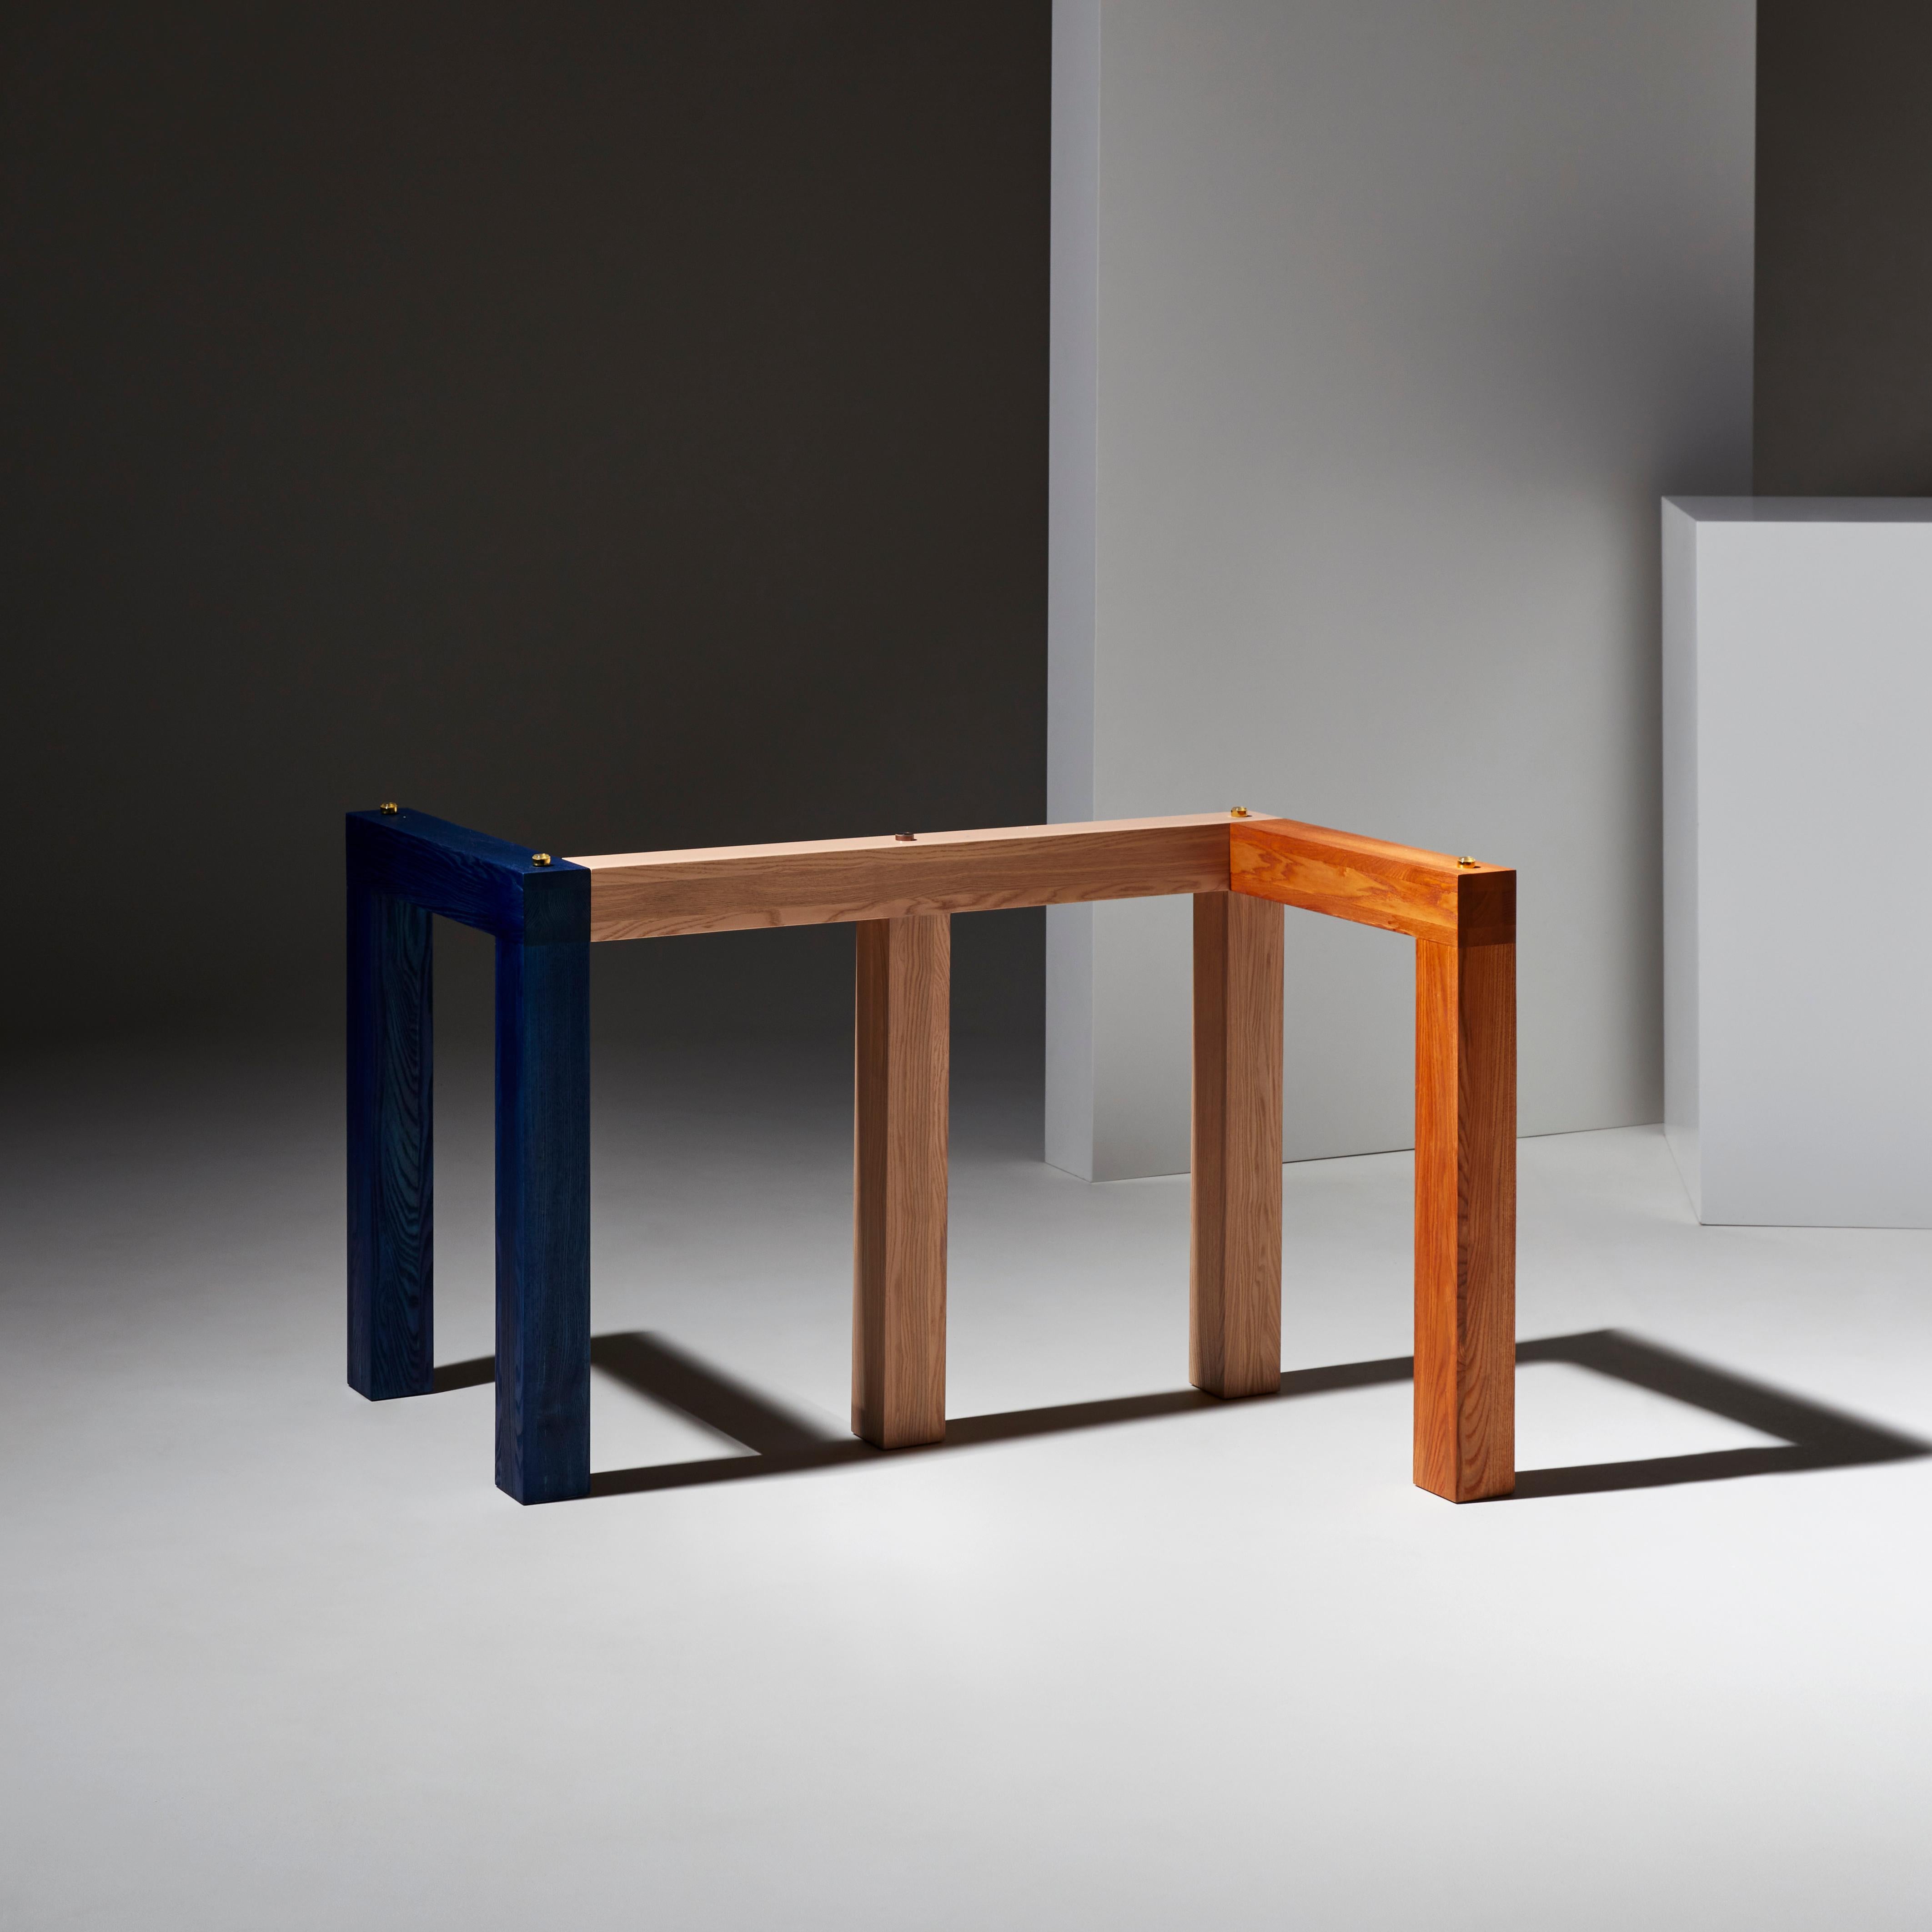 Penrose is a large dinner table in wood and glass. The design was inspired by the geometric research of mathematician Roger Penrose and his famous impossible triangle.
Depending on the point of view, the legs overlap or blend to form shapes with 3,